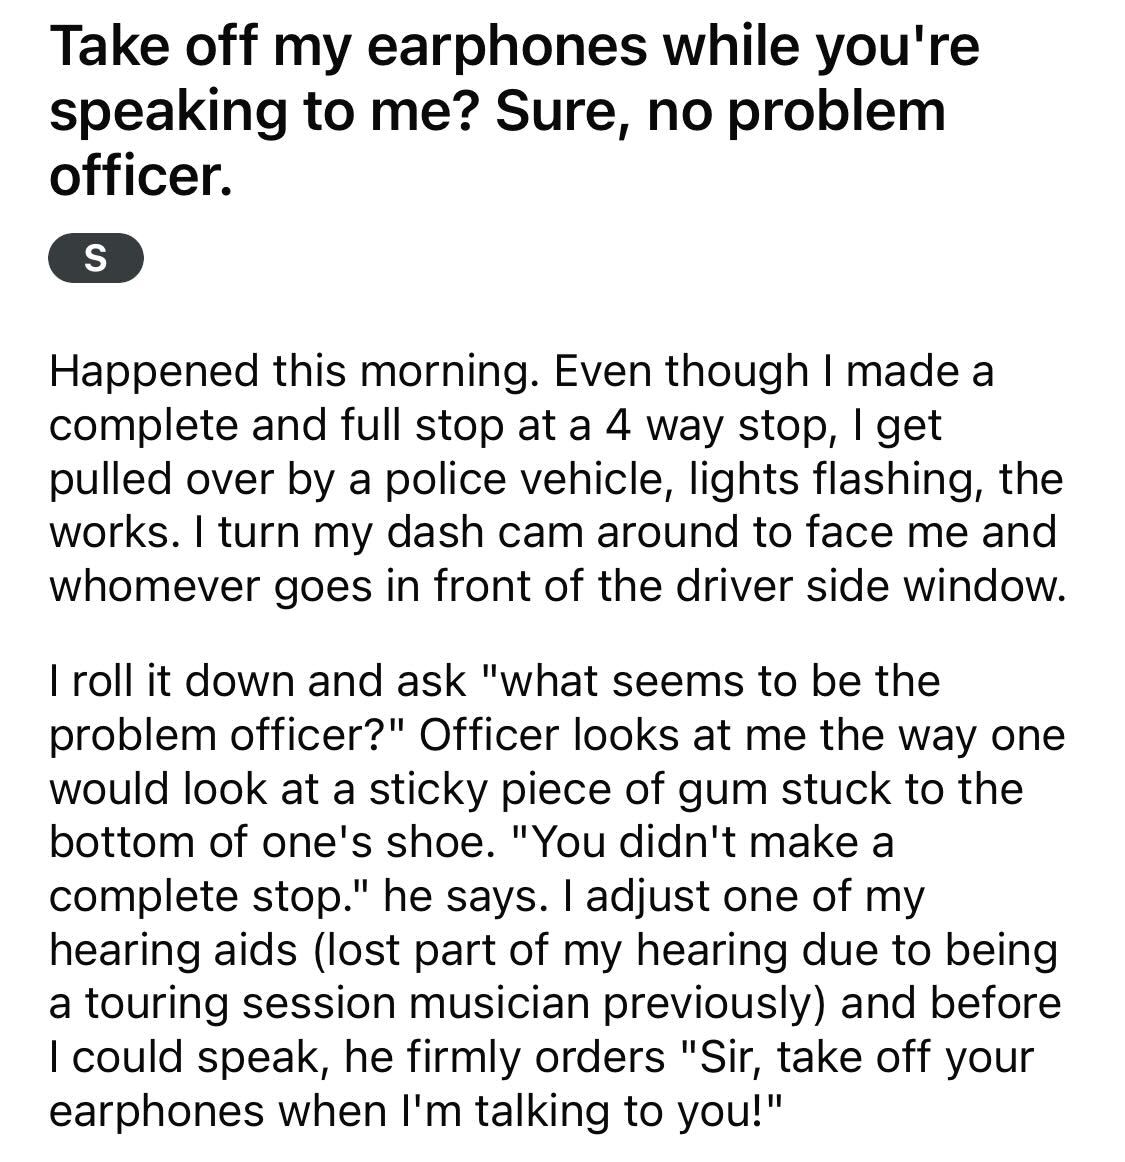 Maliciously Compliant Deaf Driver --  Take off my earphones while you're speaking to me? Sure, no problem officer. S Happened this morning. Even though I made a complete and full stop at a 4 way stop, I get pulled over by a police vehicle, lights flashing